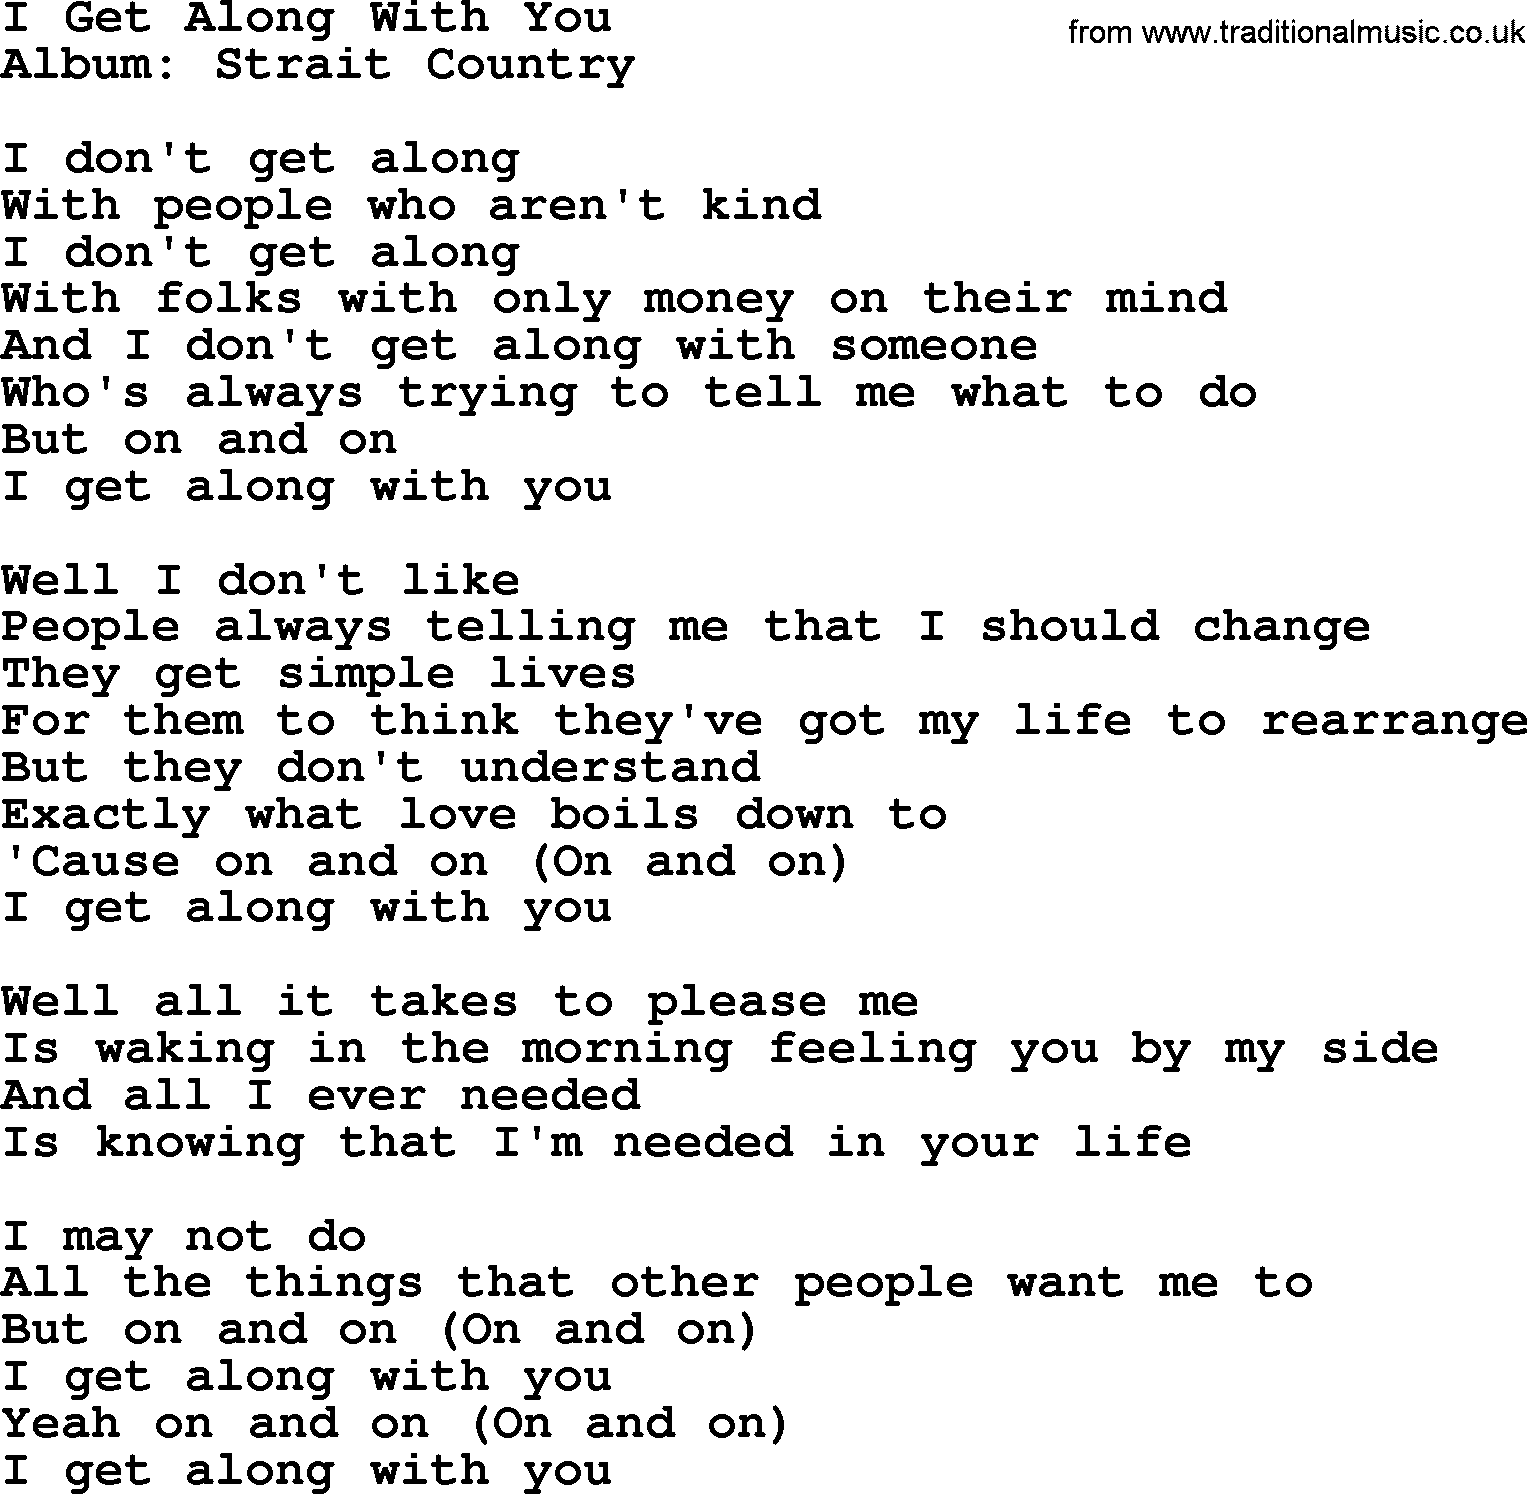 George Strait song: I Get Along With You, lyrics